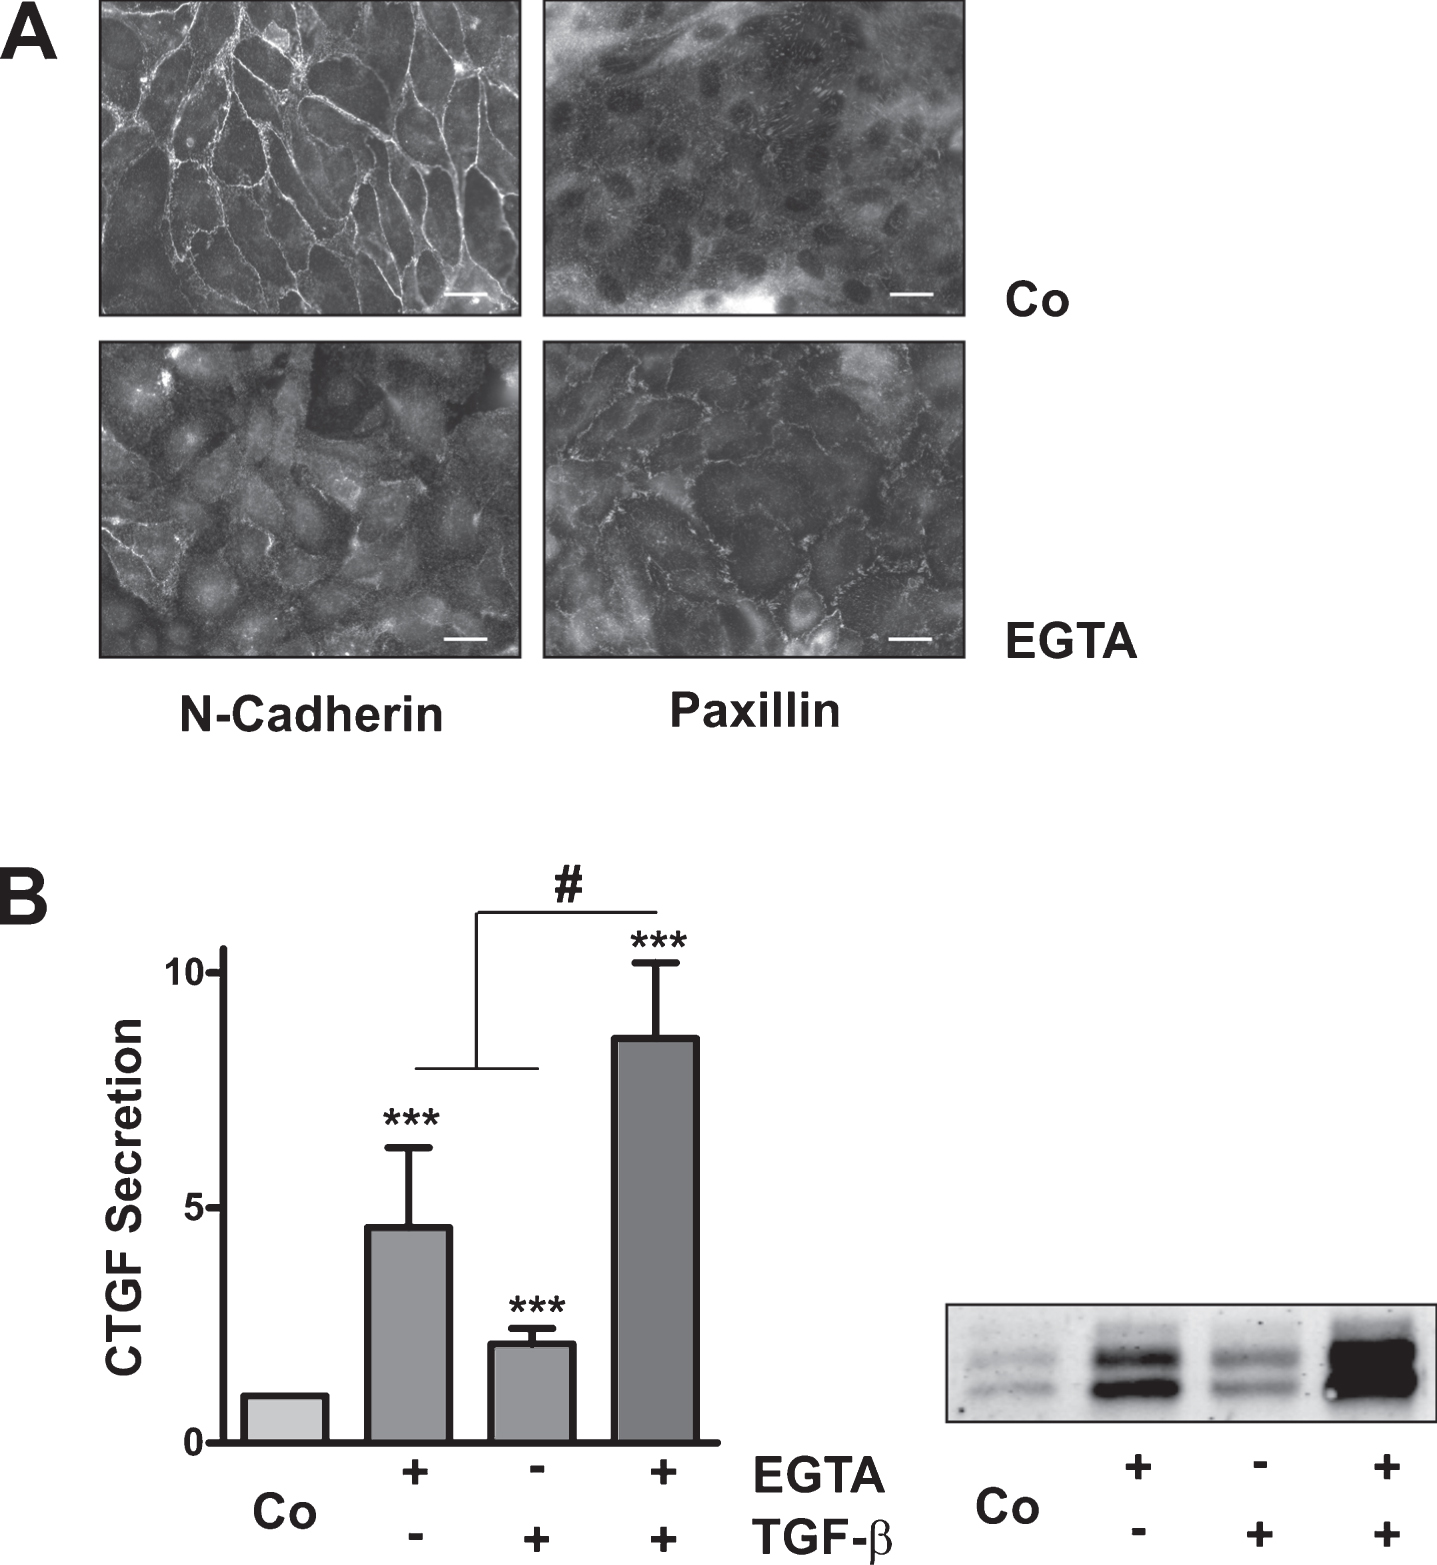 Synergistic induction of CTGF by EGTA and TGFβ-1 in primary human tubular cells. (A) Primary tubular cells were treated with EGTA (1 mM) for 2 h. N-cadherin and paxillin were detected by indirect immunofluorescence. Scale bars: 20μm. (B) Cultures of primary tubular cells obtained from 3 different donors were pre-treated with EGTA (1 mM) for 30 min and were then stimulated with TGF-β for 6 h. CTGF was detected in the cell culture supernatants by Western blotting. Intensity of CTGF secreted by control cells was set to 1 on each blot. Data are means±SD of 5 independent experiments. *p > 0.05, ***p < 0.001 vs control cells, ANOVA with Bonferroni post hoc-test; #p < 0.05, paired t-test, sum of EGTA plus TGFβ-1 vs combined stimulation.